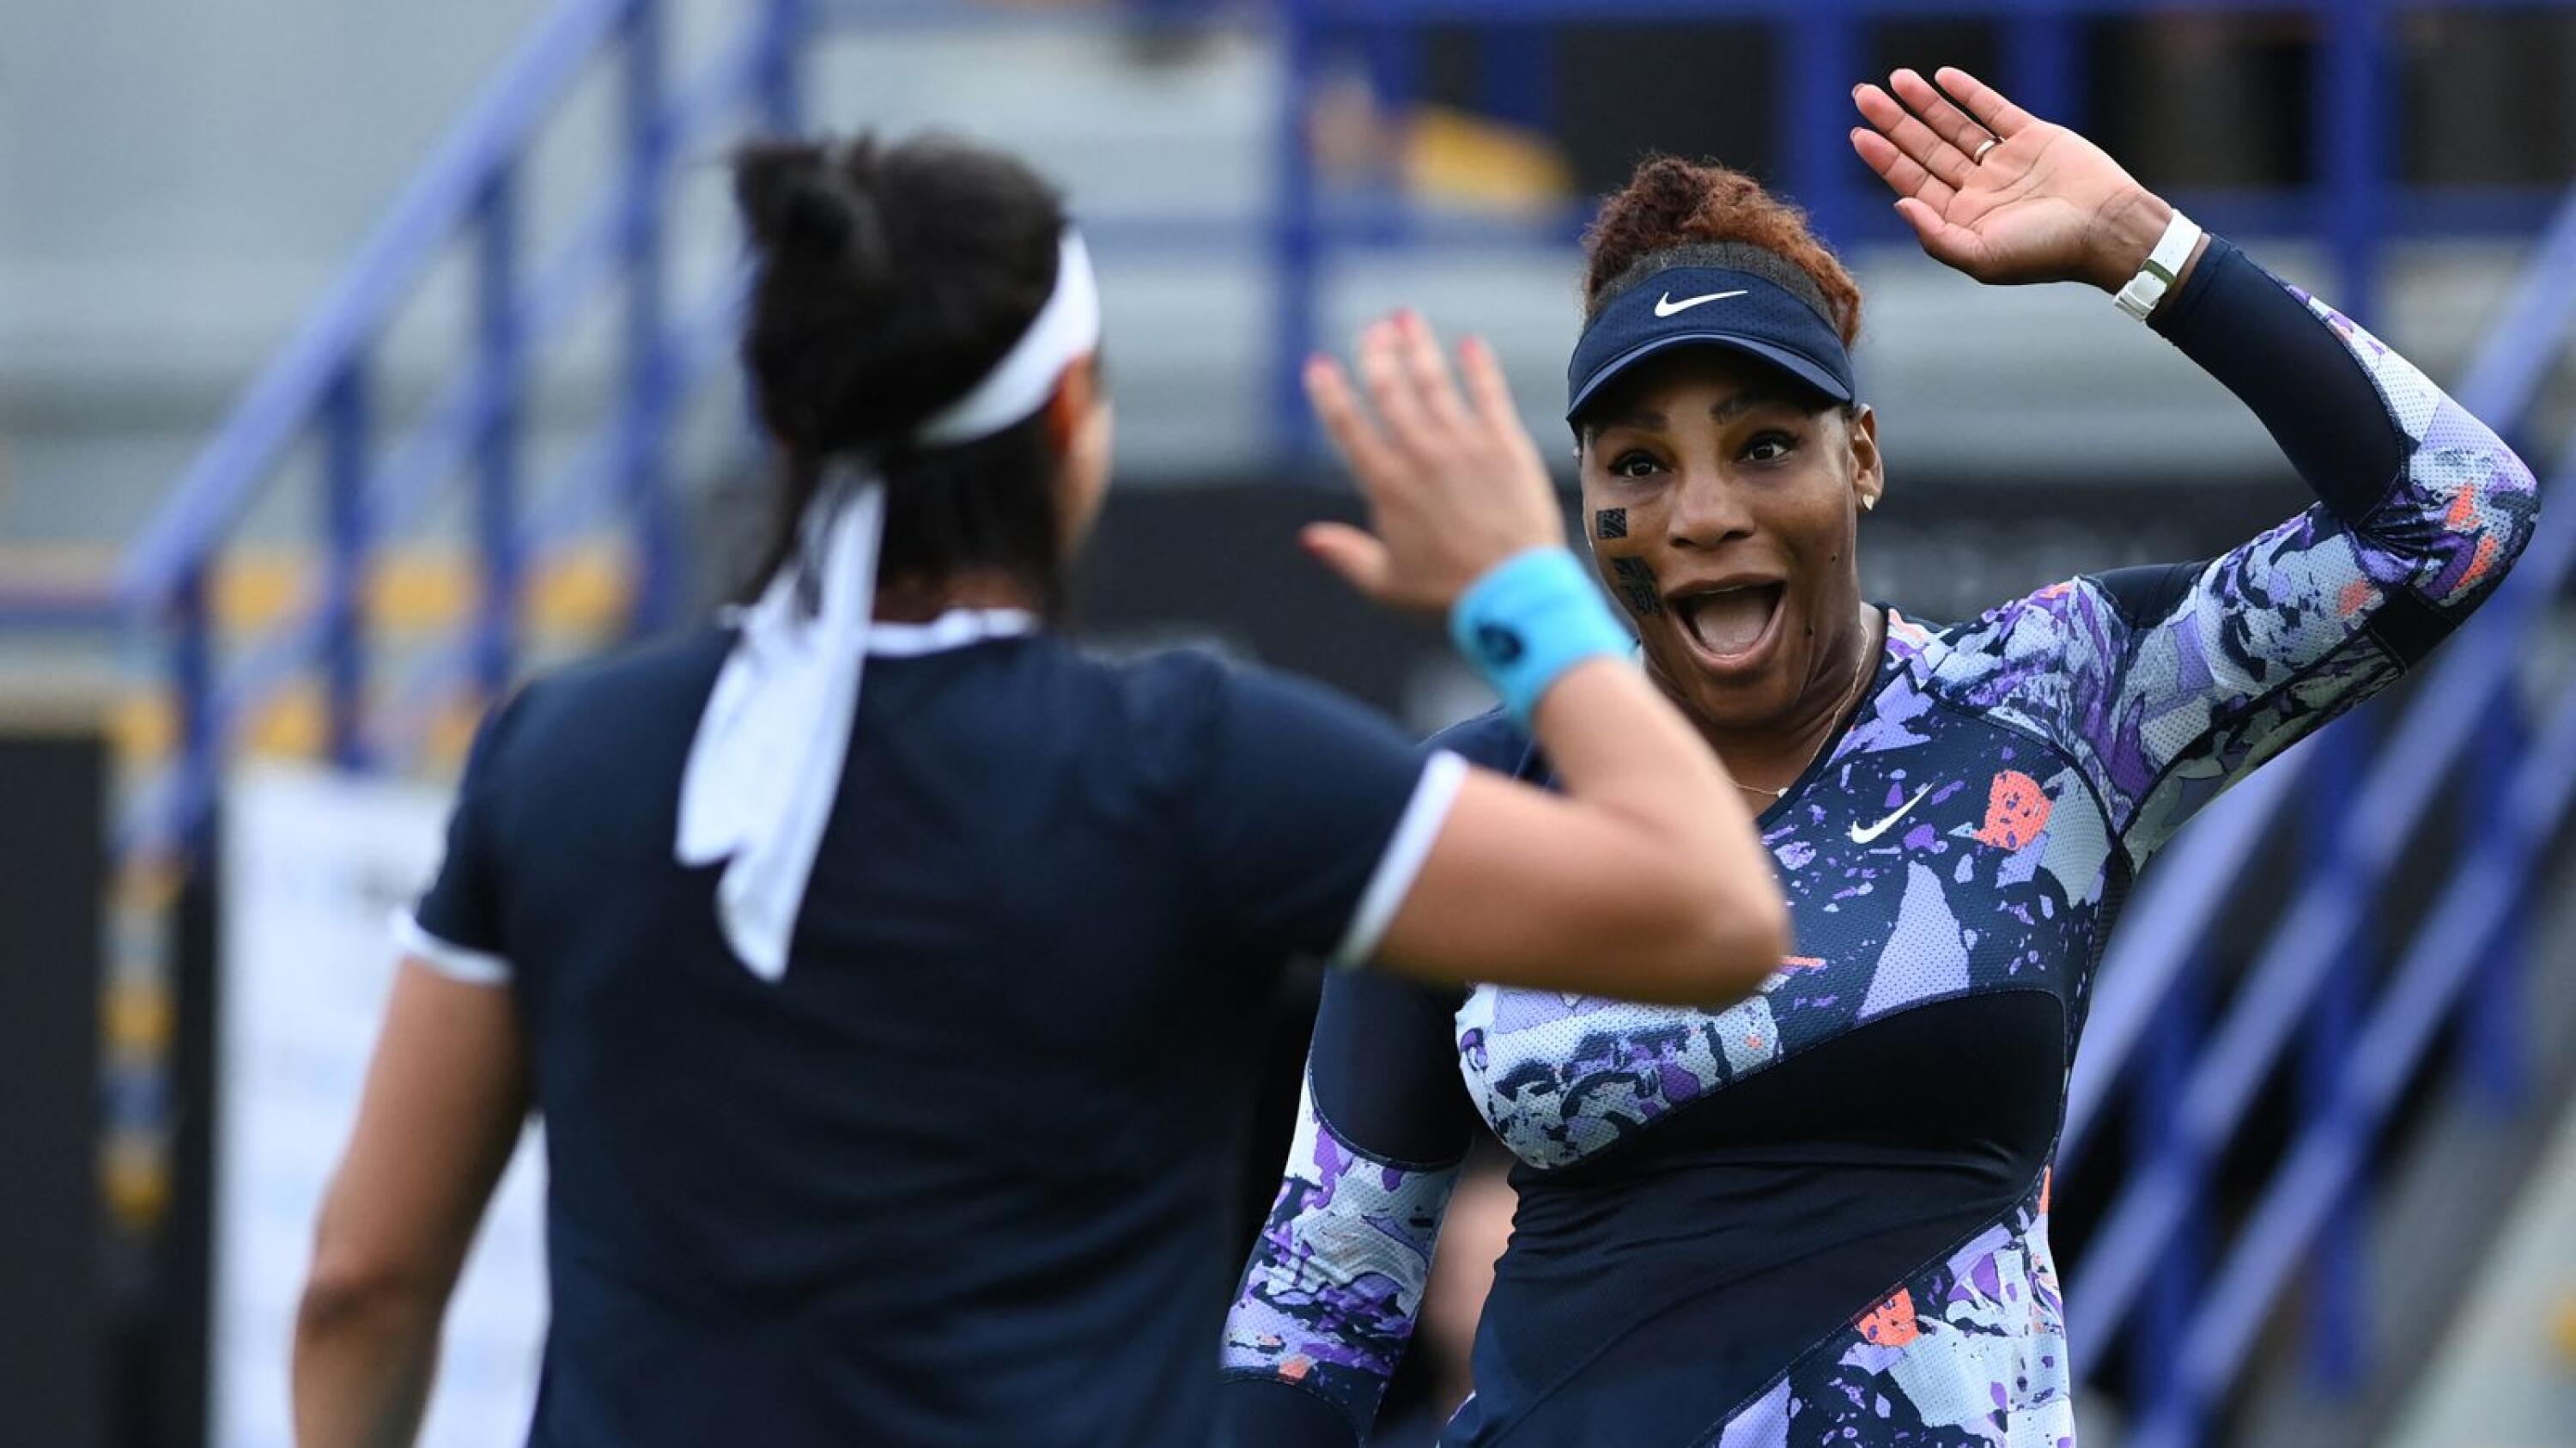 US player Serena Williams and Tunisia's Ons Jabeur celebrate after winning against Spain's Sara Sorribes Tormo and Czech Republic's Marie Bouzkova at the end of their round of 8 women's doubles tennis match, on day three, of the Eastbourne International tennis tournament in Eastbourne, southern England on Tuesday